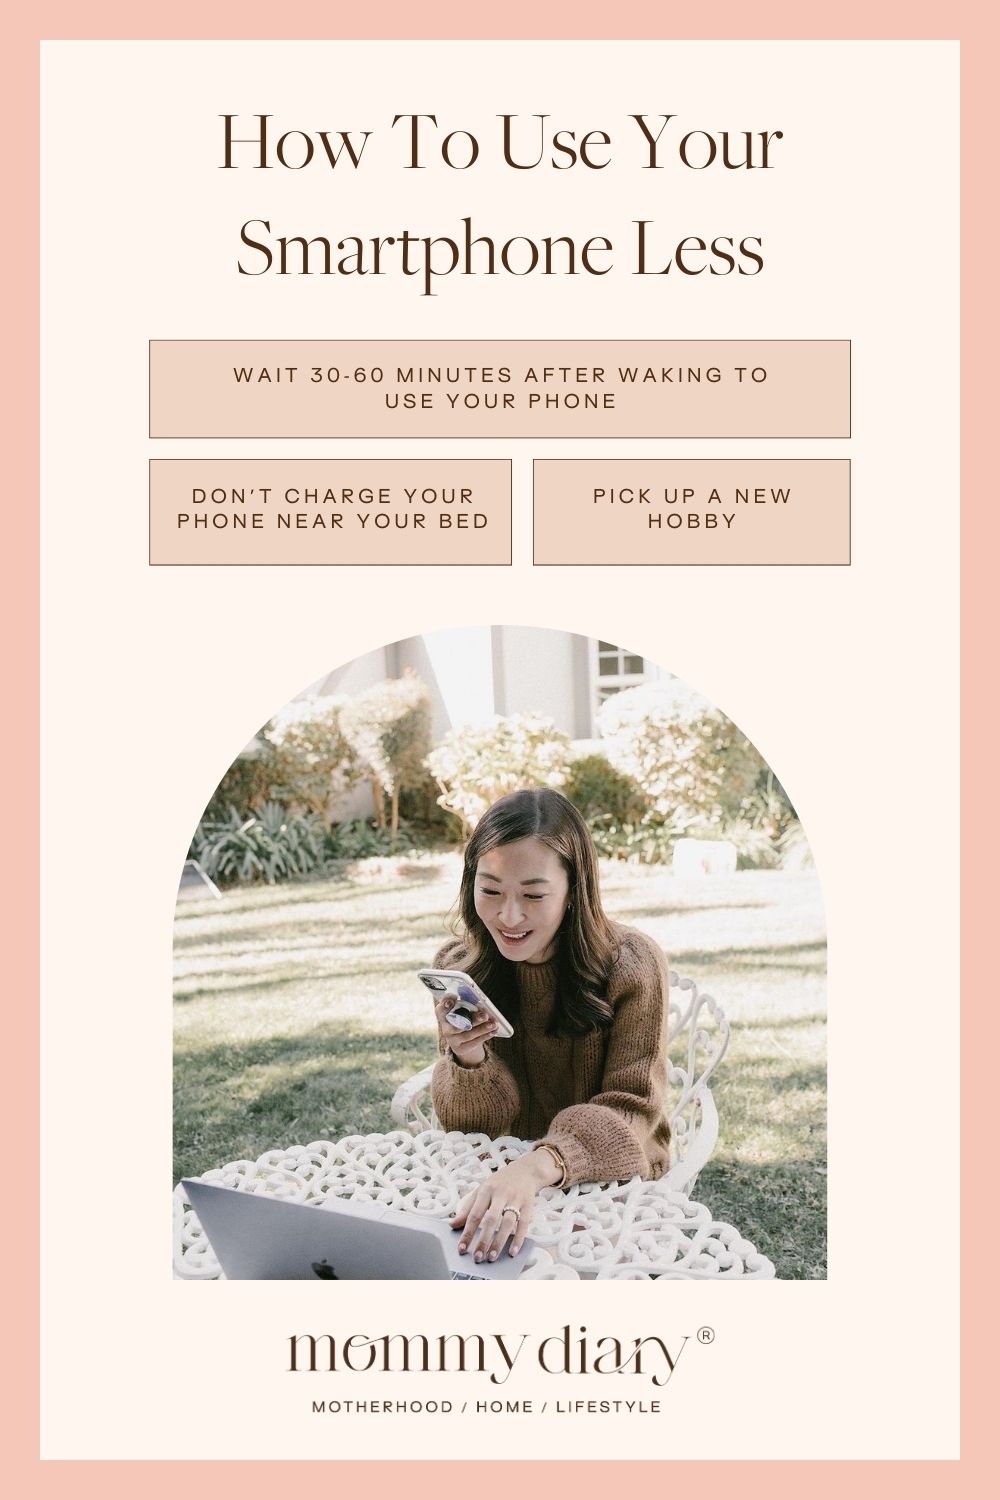 Ways To Use Smartphone Less